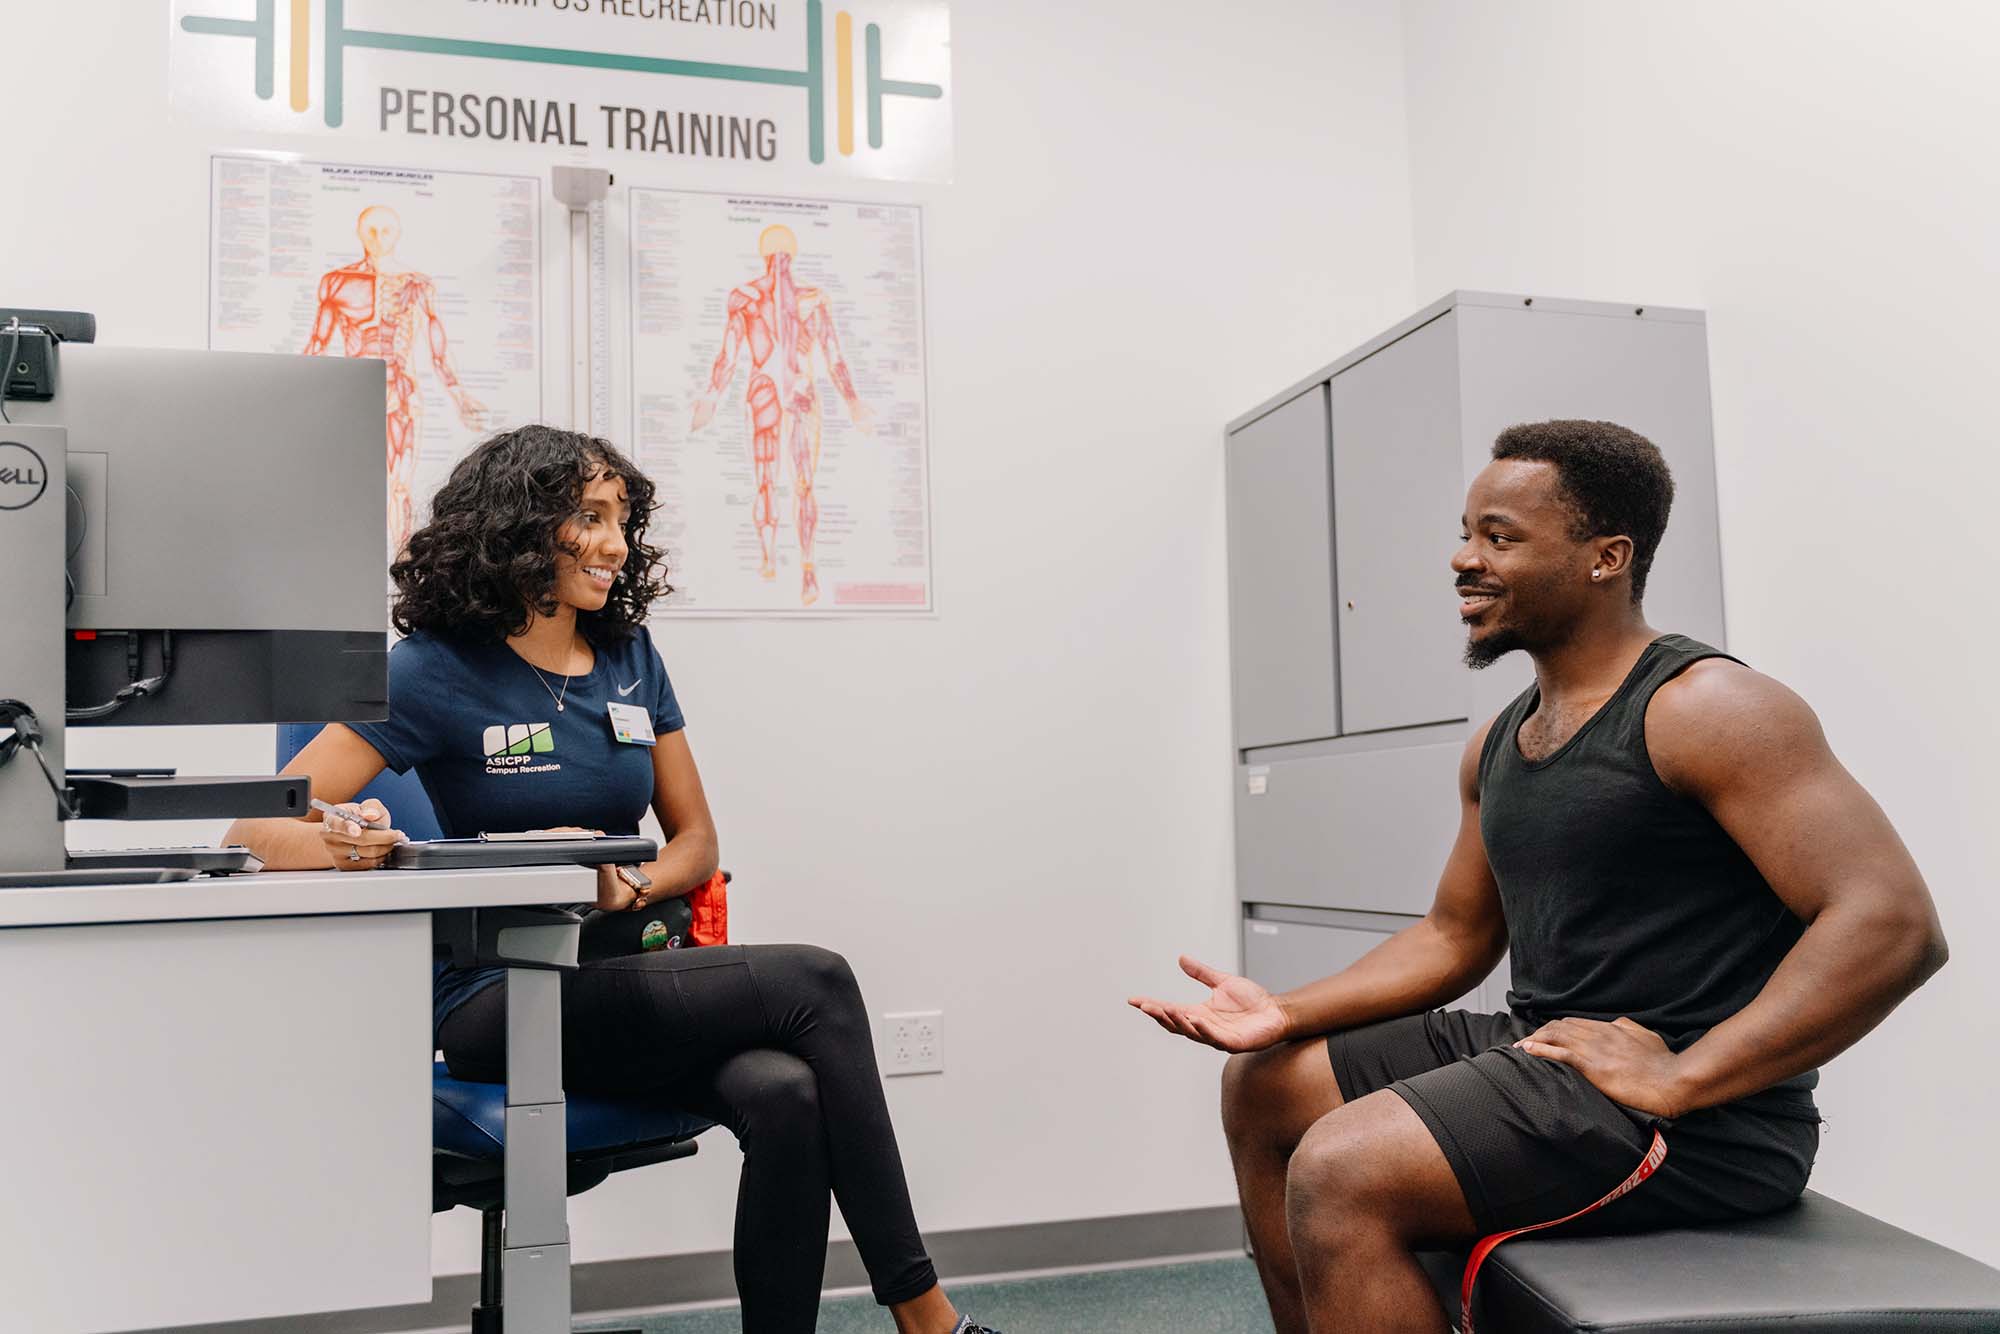 Personal trainer having a consultation with a student in an office